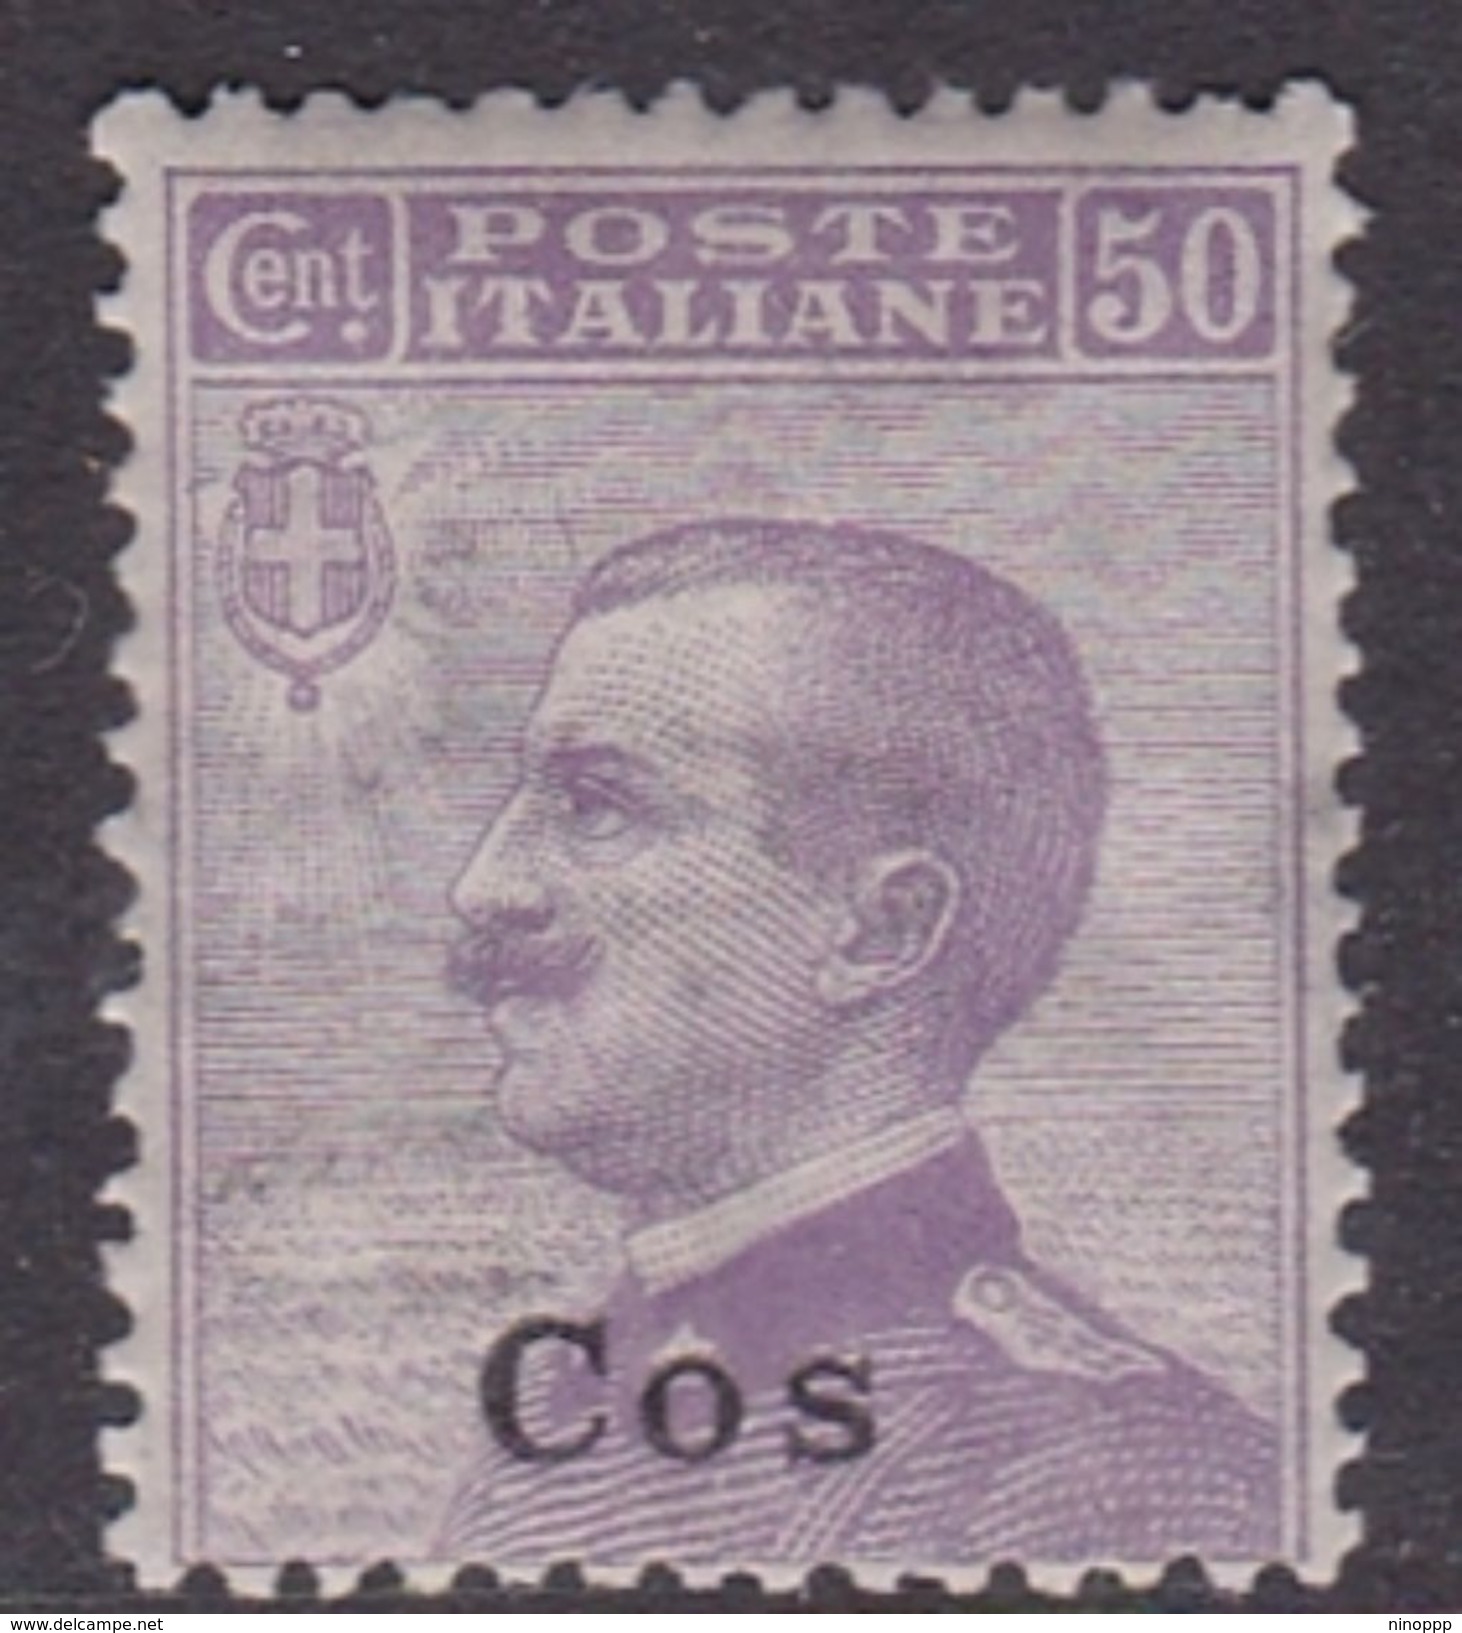 Italy-Colonies And Territories-Aegean-Coo S 7  1912 50c Violet MNH - Aegean (Coo)